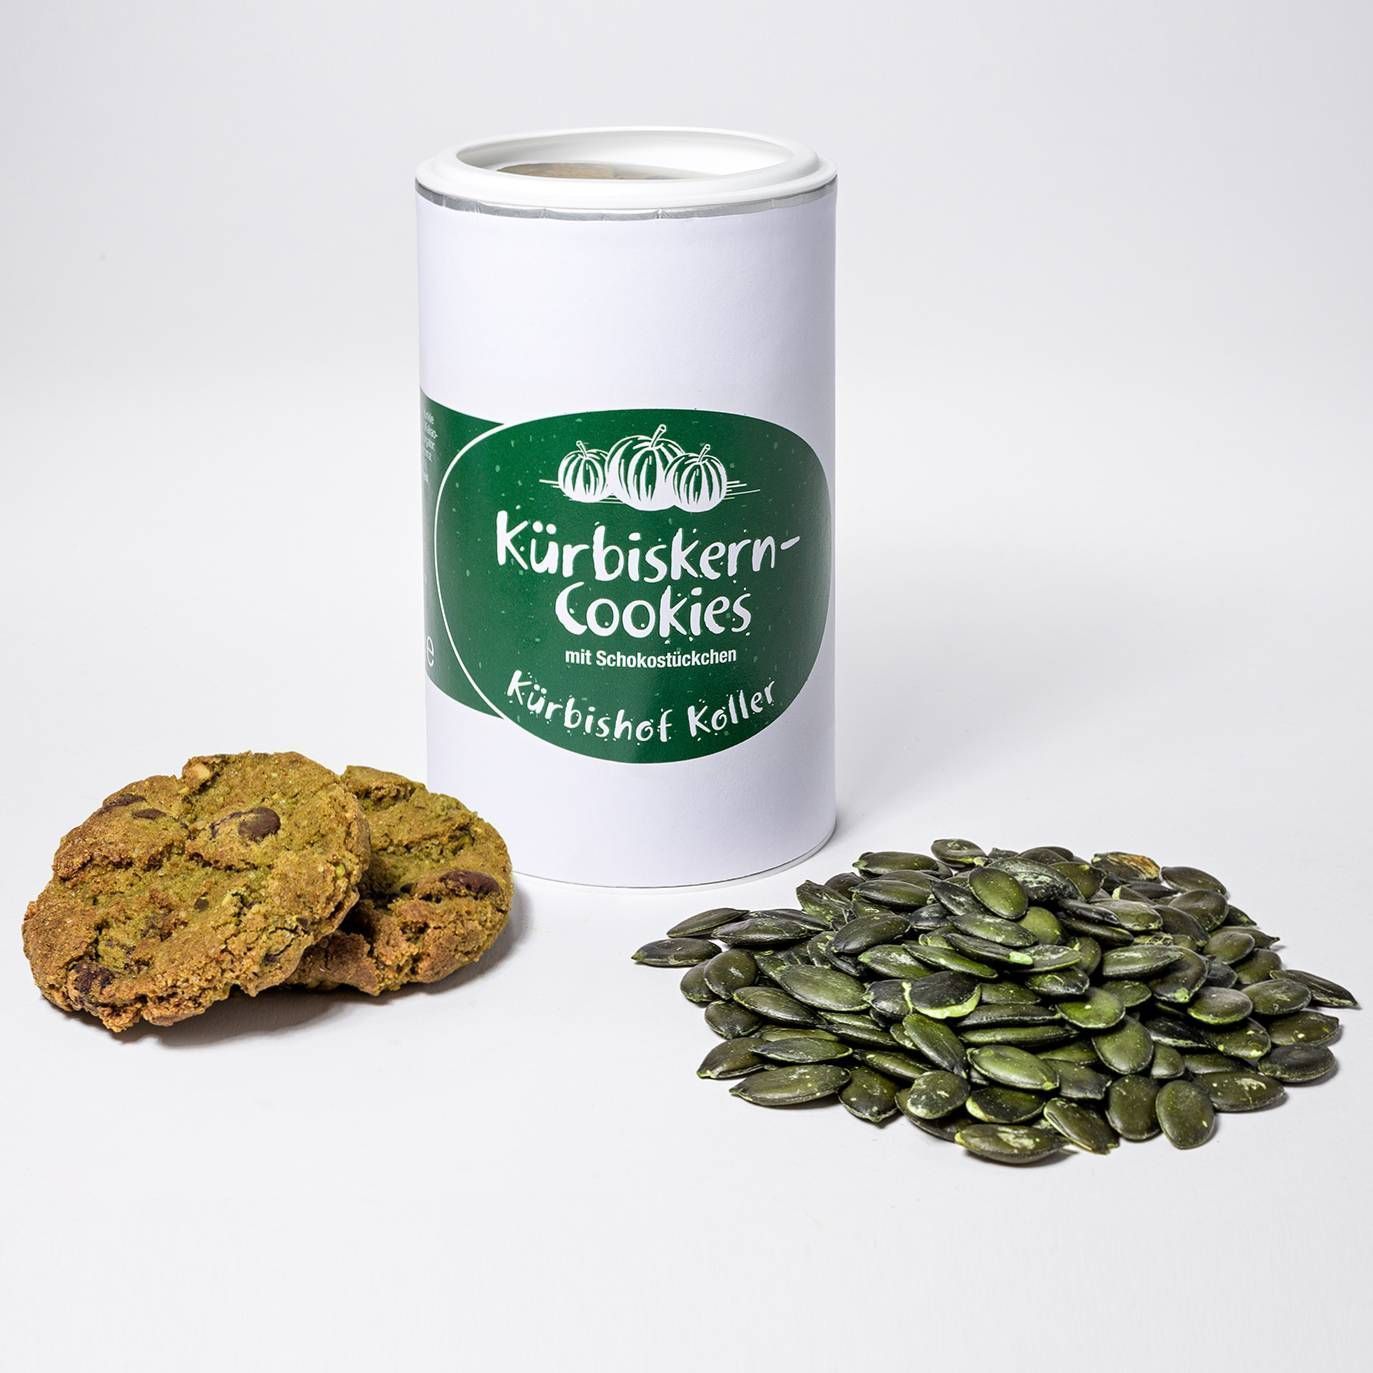 Pumpkin Seed Cookies with Chocolate Chips in Burkina Faso